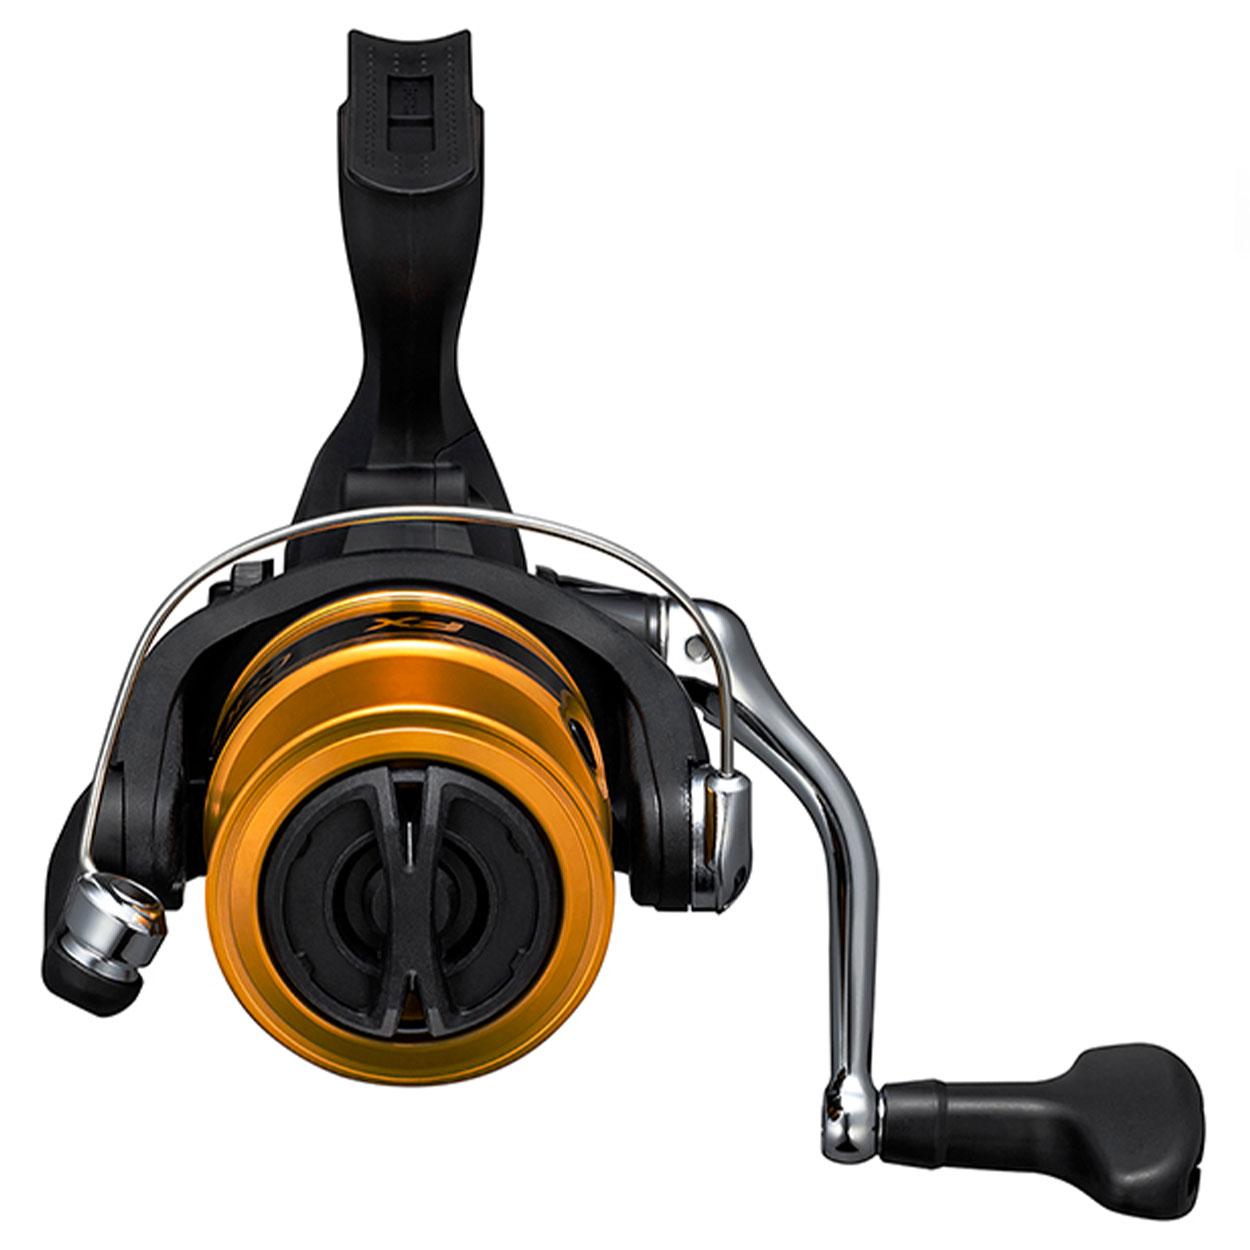 SHIMANO ROLLE FX 1000 FC